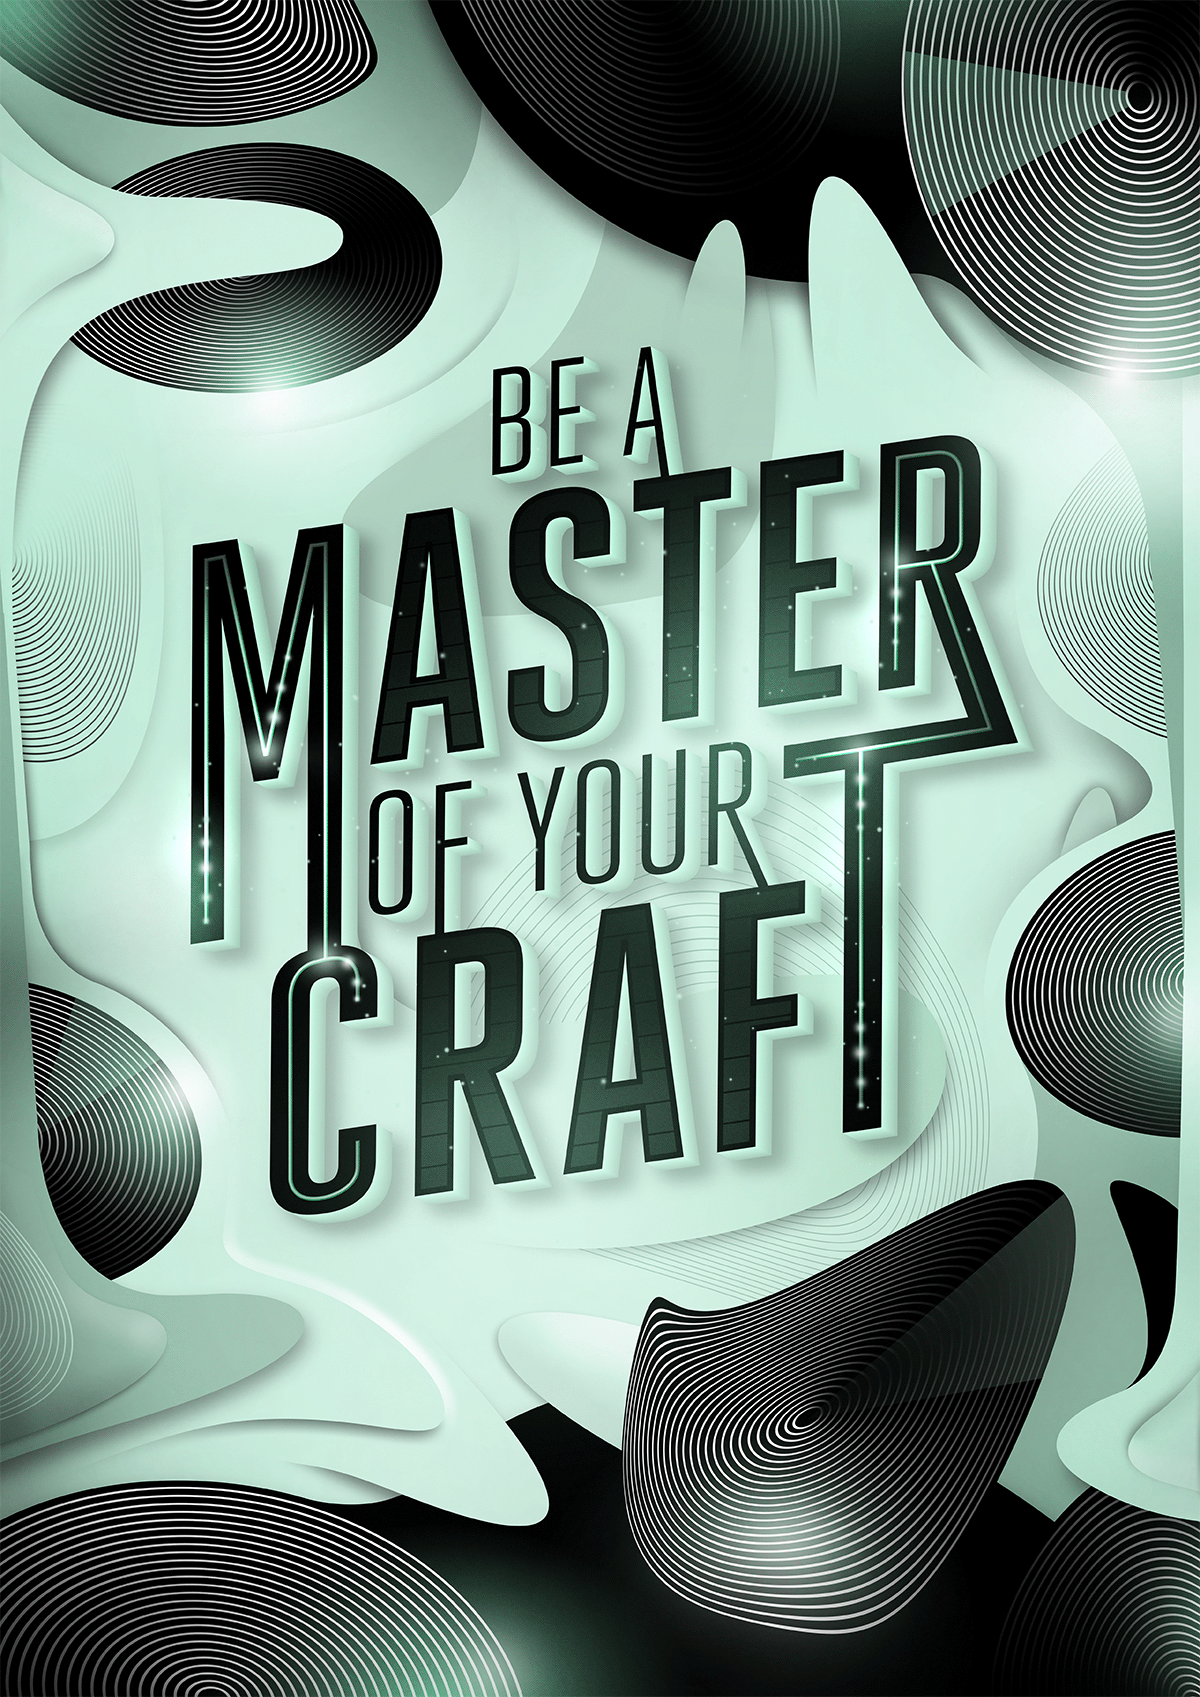 MASTER OF YOUR CRAFT / Design and Illustration :: Behance